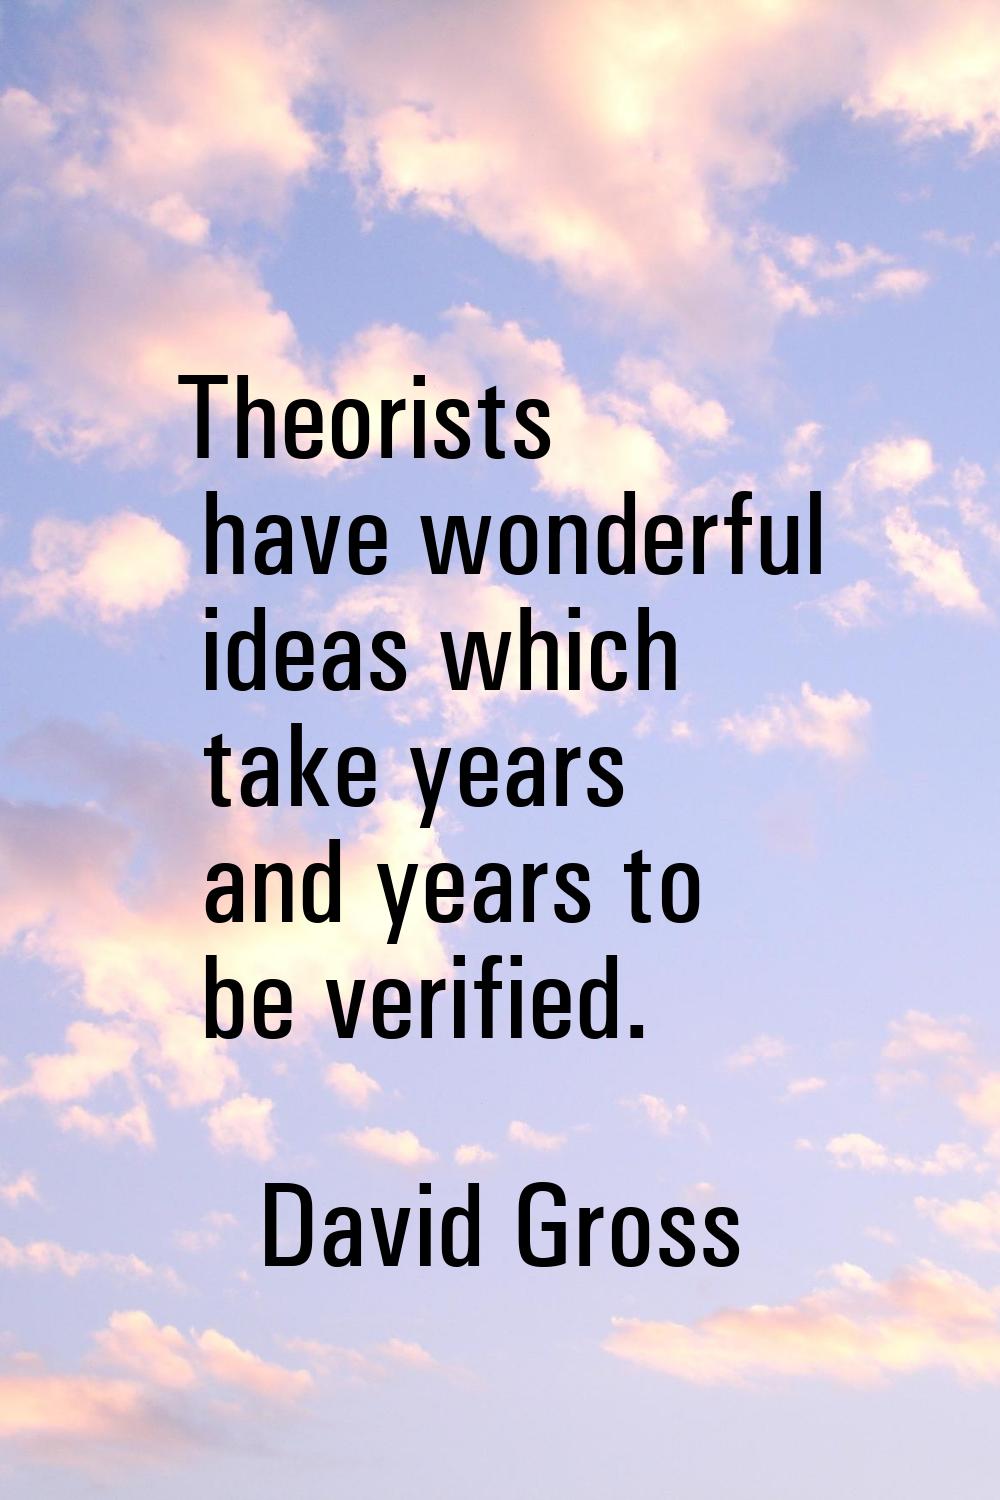 Theorists have wonderful ideas which take years and years to be verified.